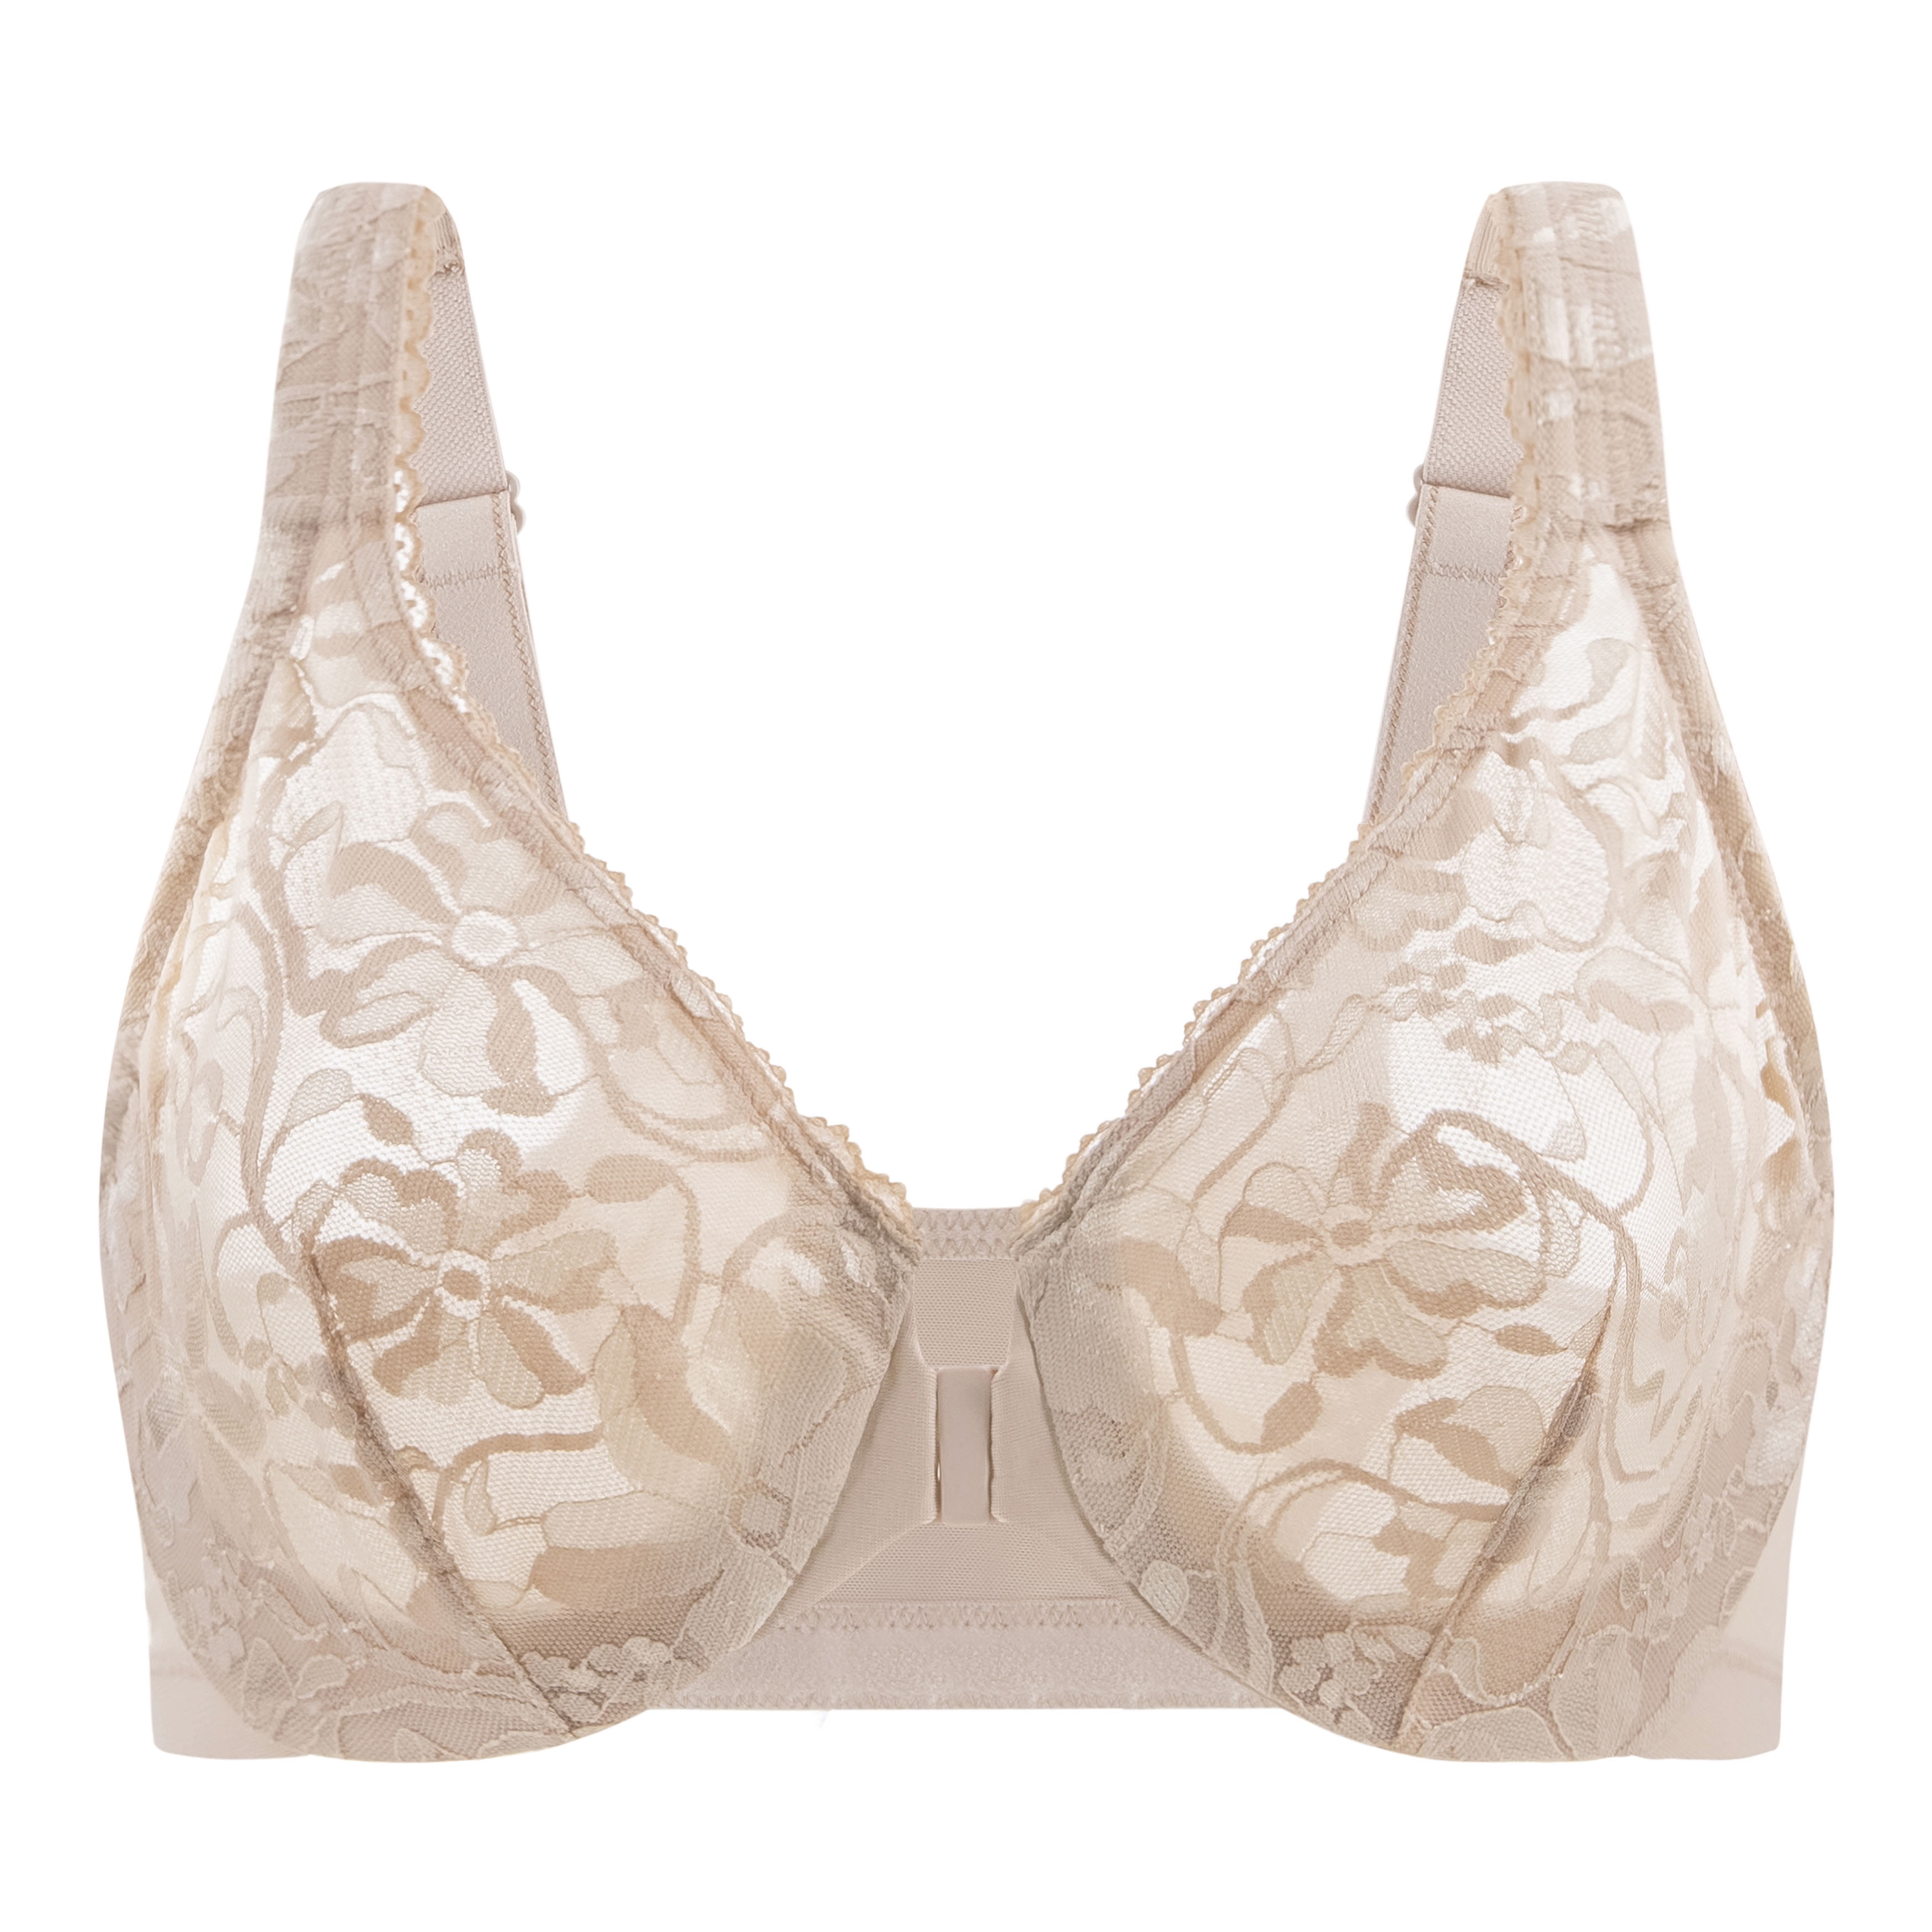 Elomi Morgan Stretch Lace Banded Underwire Bra (4111),38GG